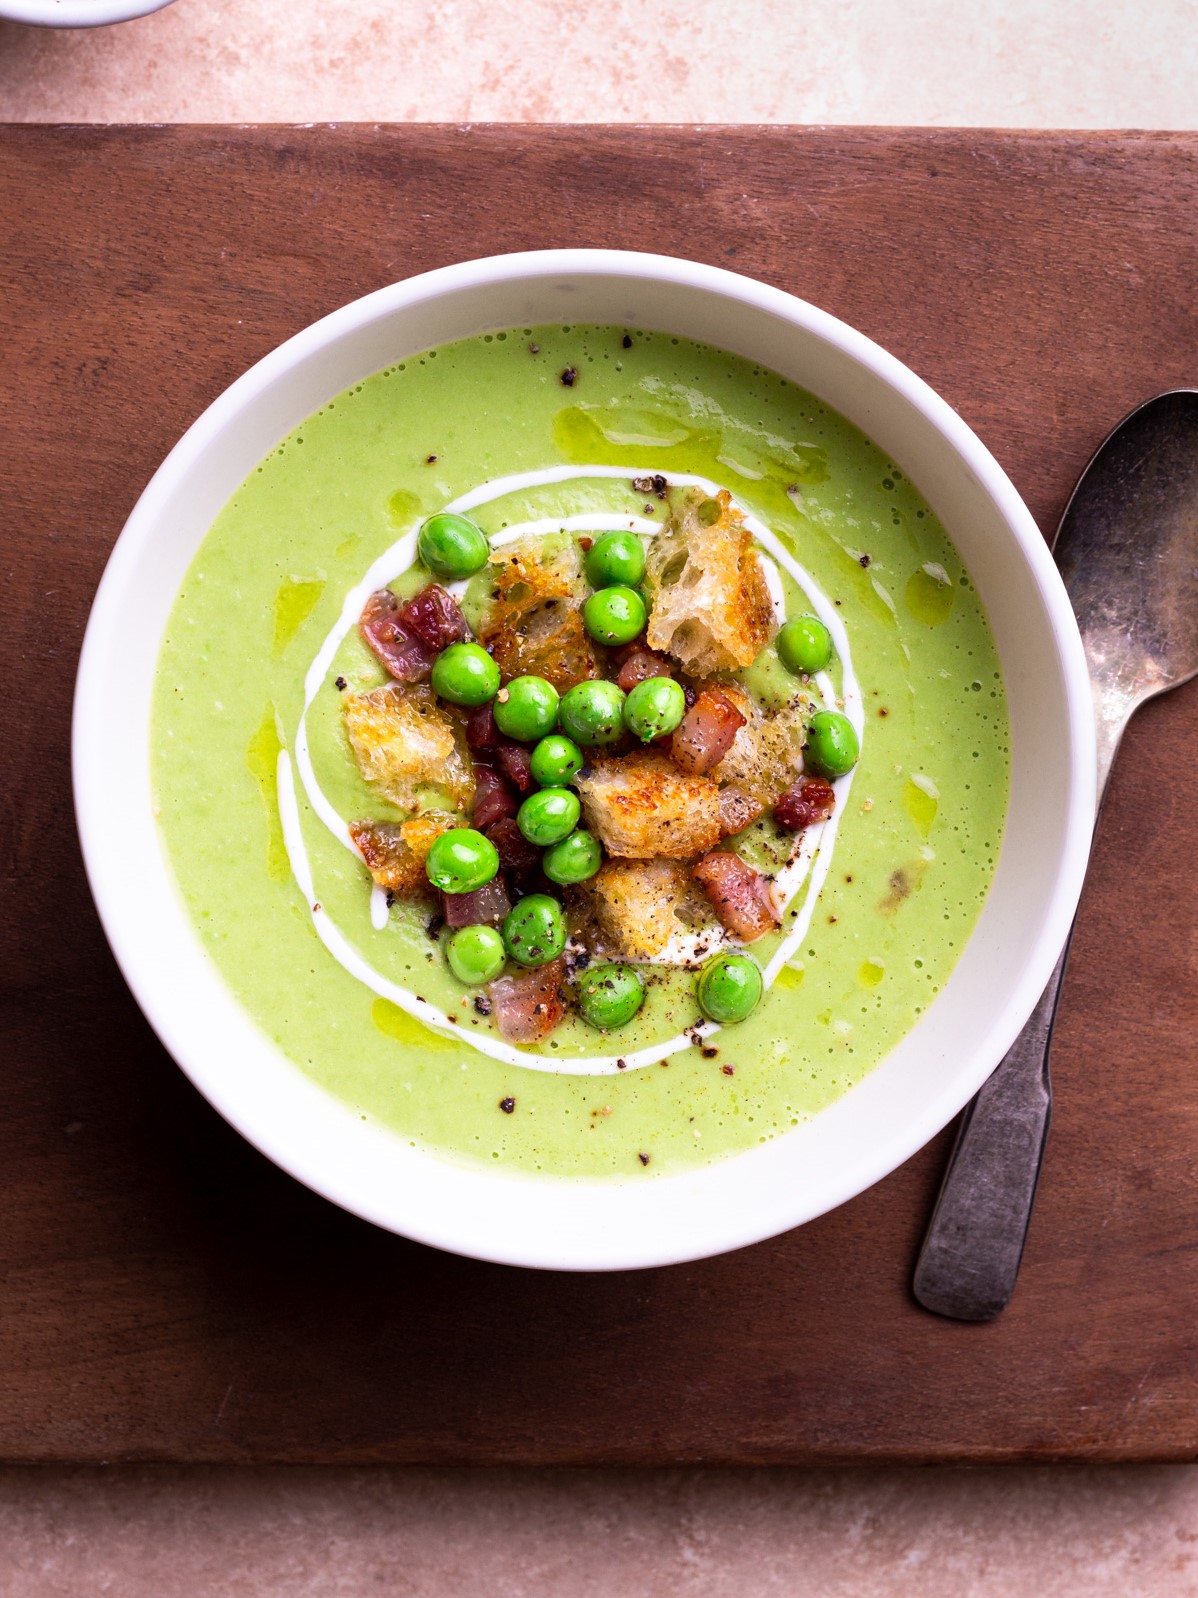 Overhead image of a bowl of creamy green pea soup topped with pancetta and croutons.